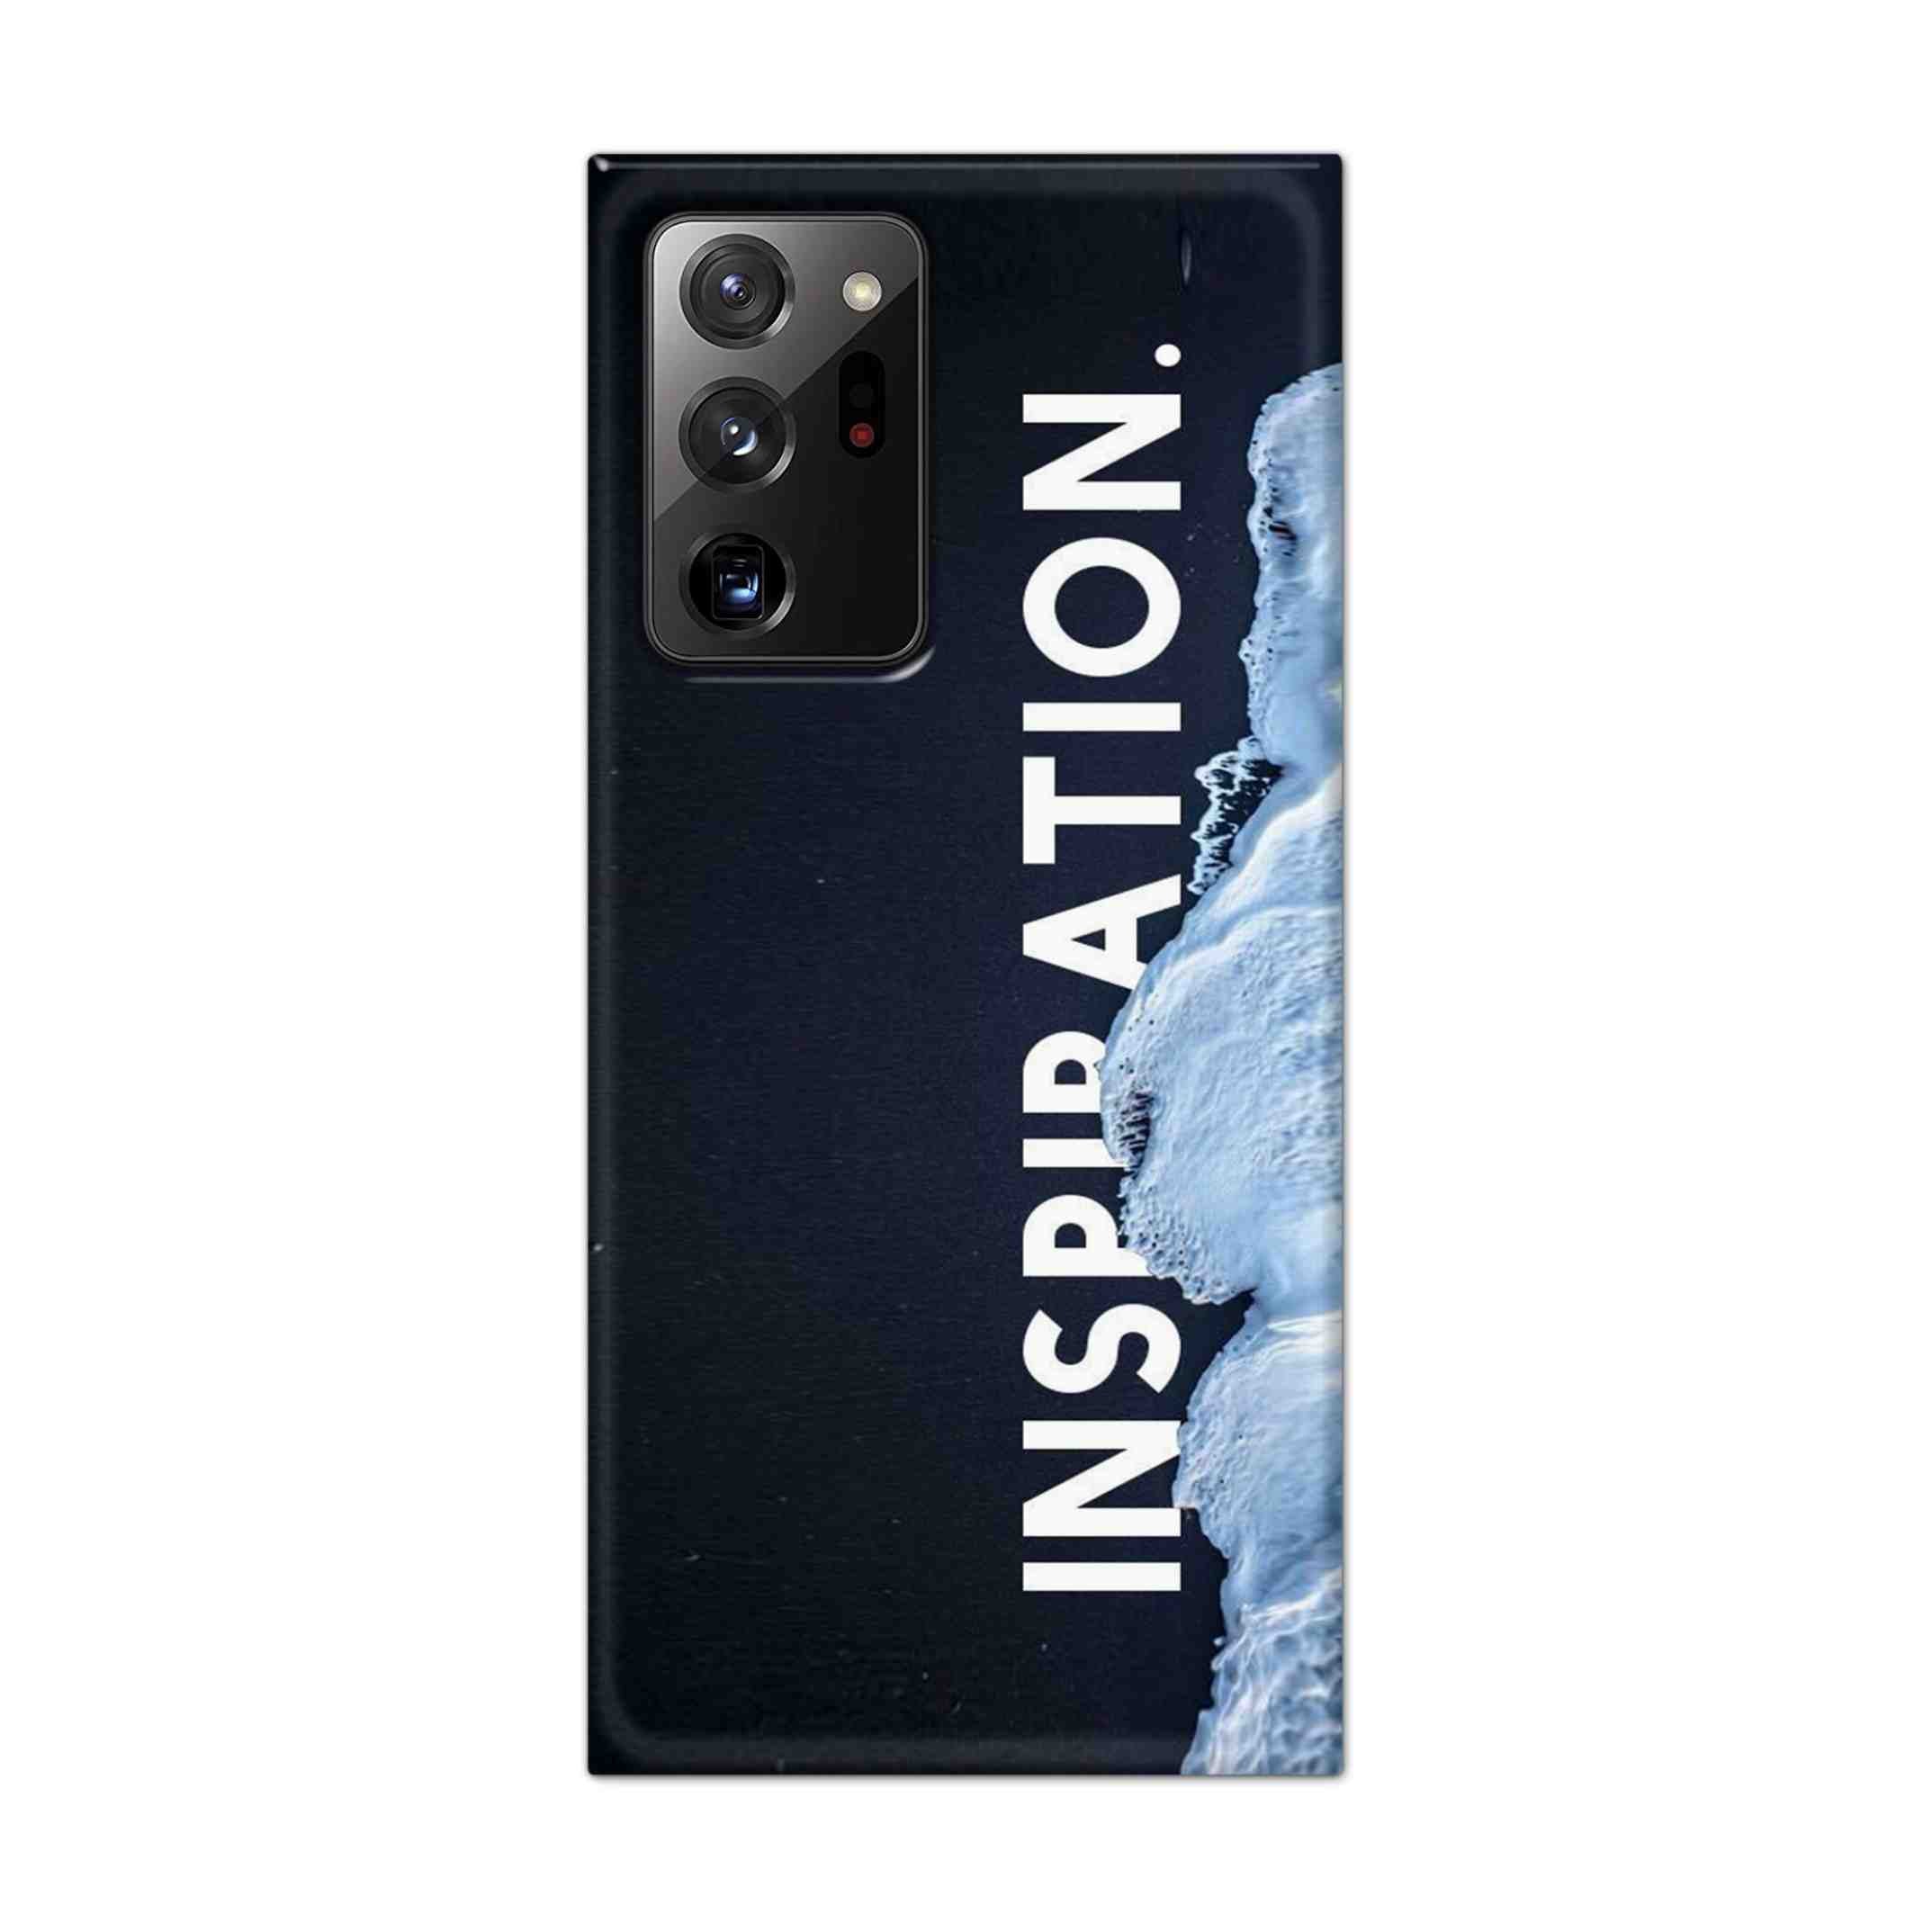 Buy Inspiration Hard Back Mobile Phone Case Cover For Samsung Galaxy Note 20 Ultra Online